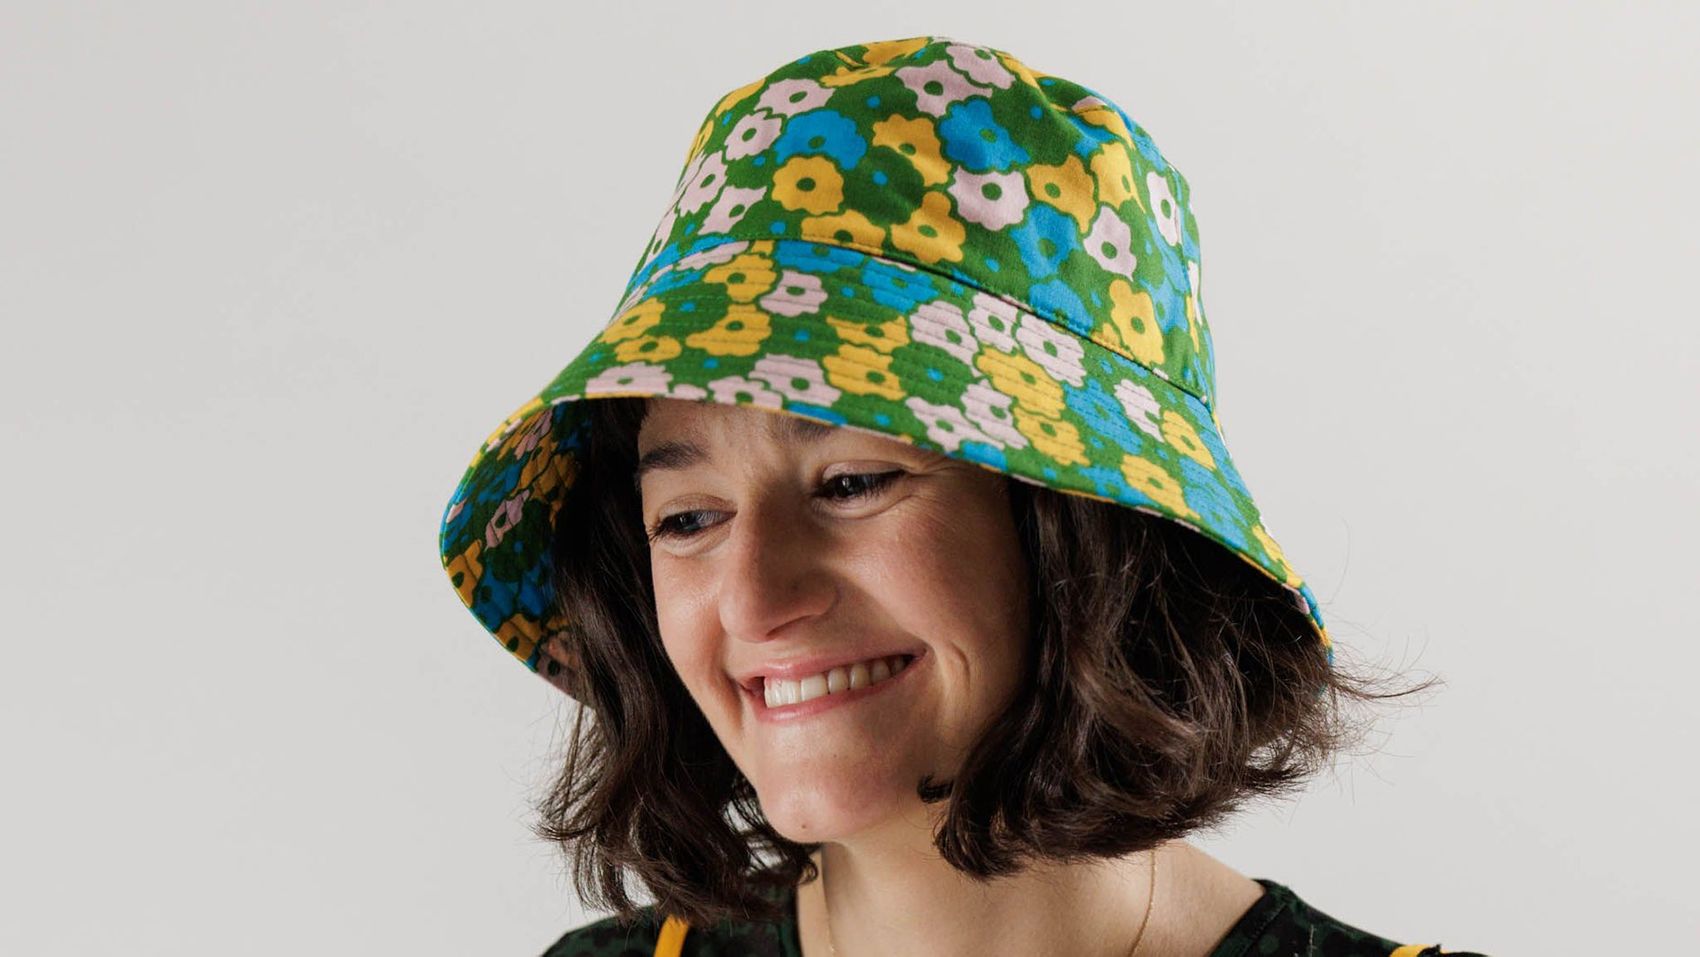 Bucket Hats Aren't Just for Summer Anymore - WSJ